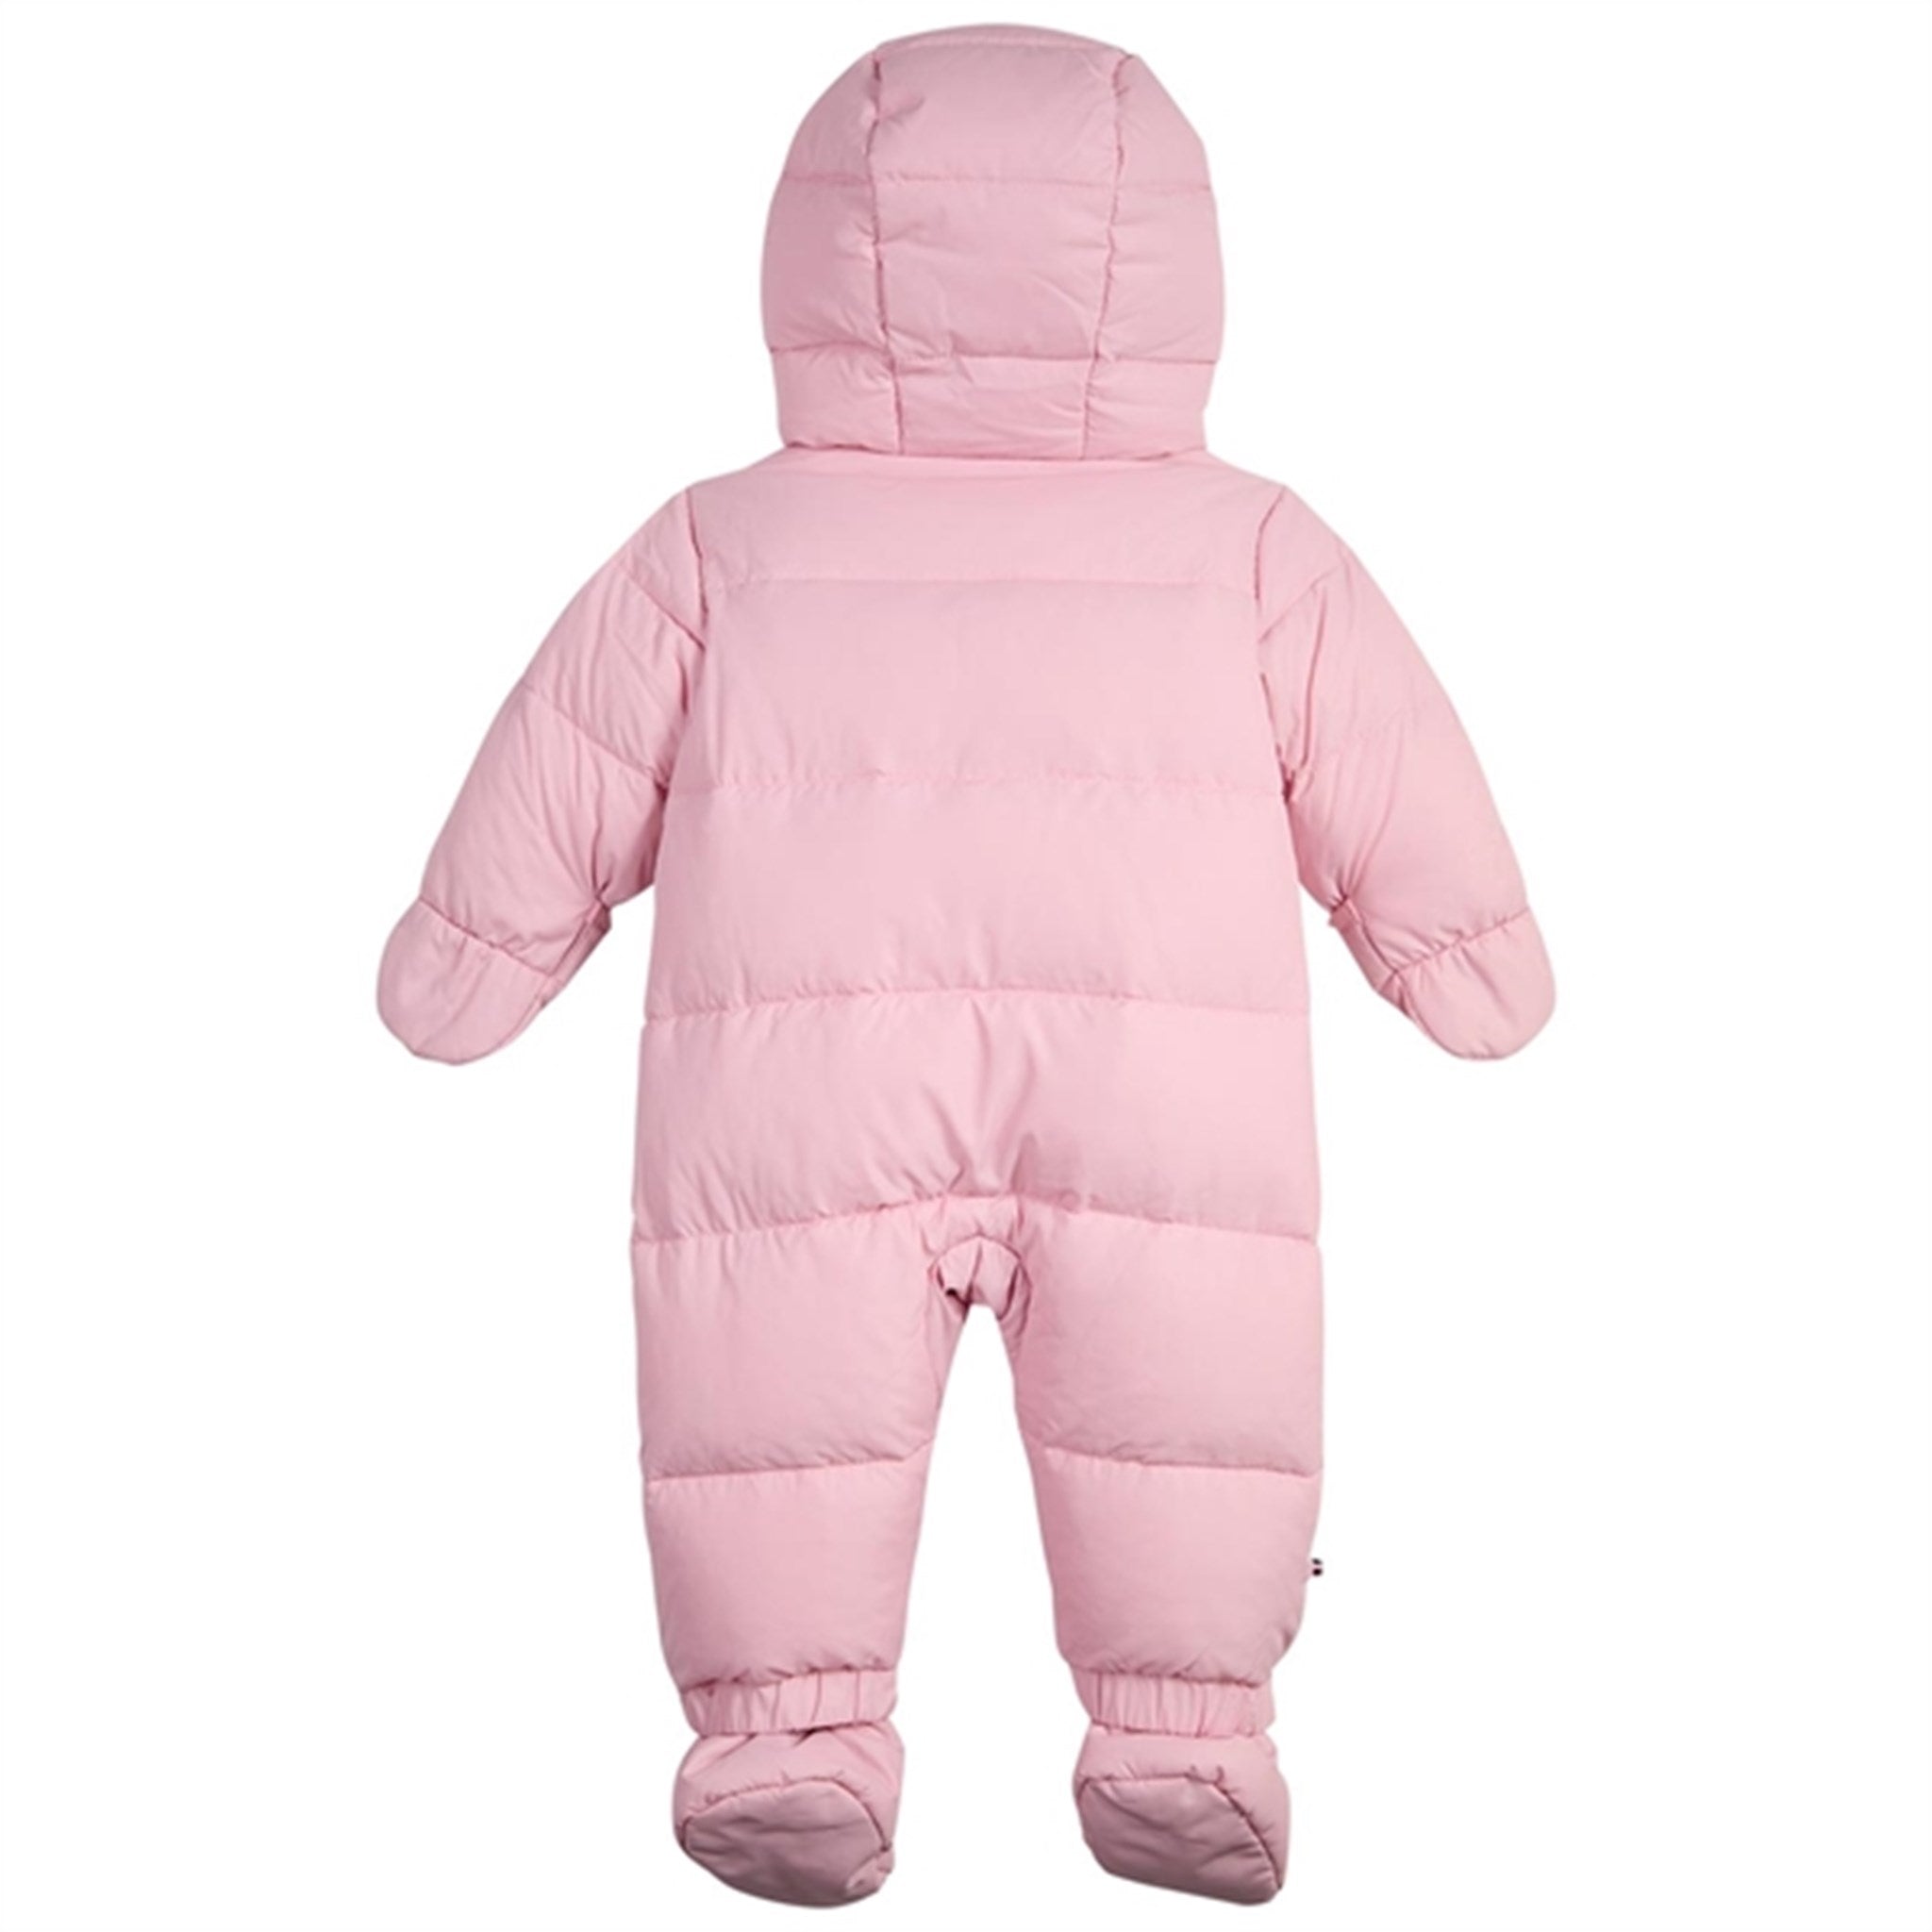 Tommy Hilfiger Baby Branded Zip Skisuit Pink Shade 2